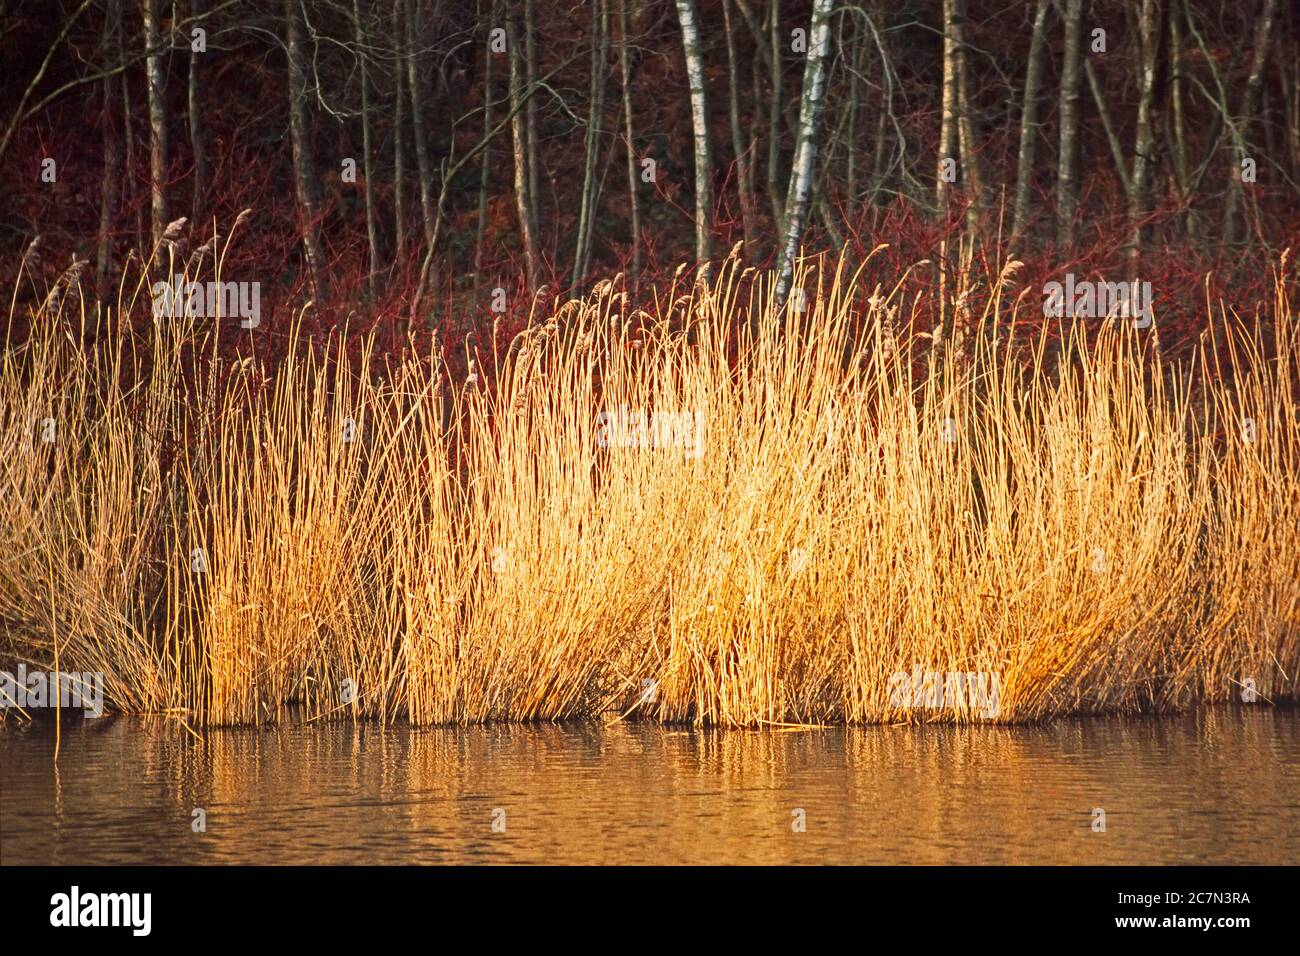 Common reed, Phragmites communis, grows up to 3m high, sought after for thatching roof work Stock Photo